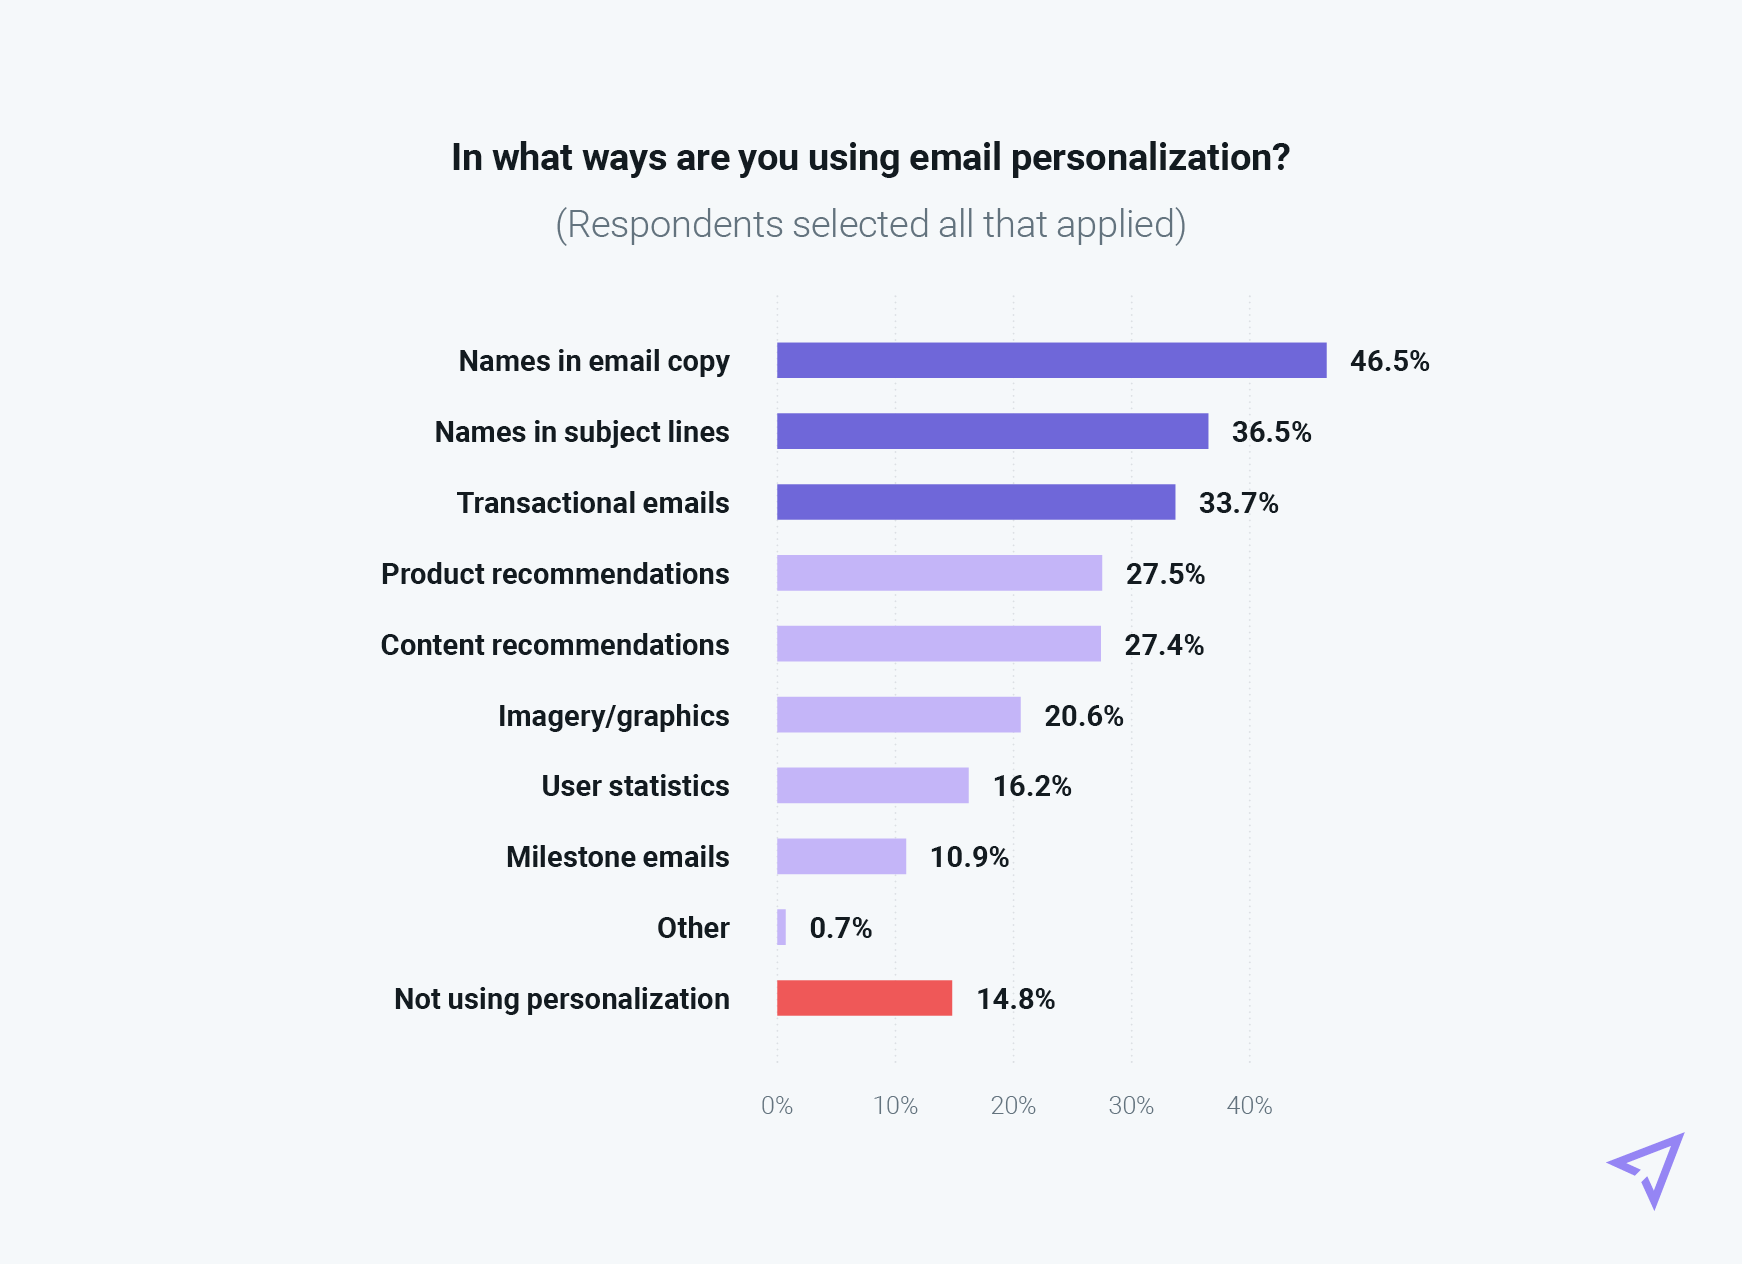 Chart of email personalization uses